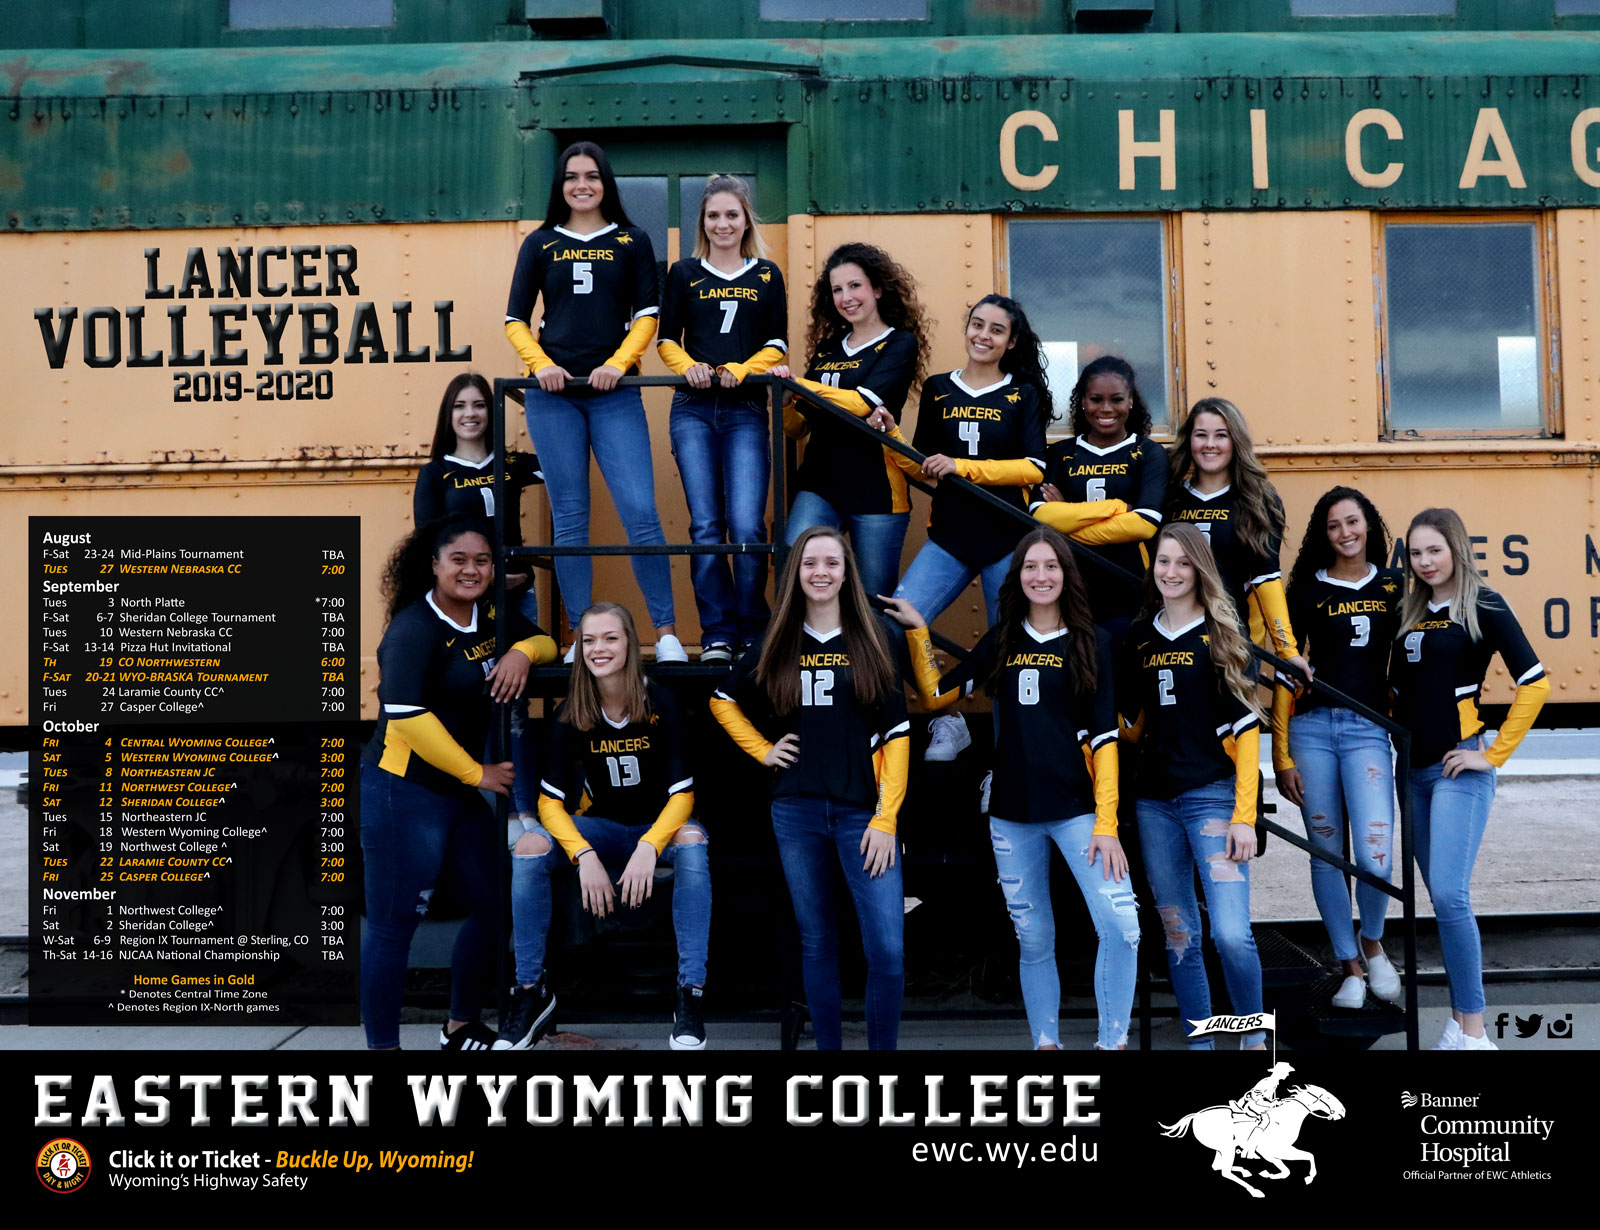 Eastern Wyoming College Lancer Volleyball Team Poster